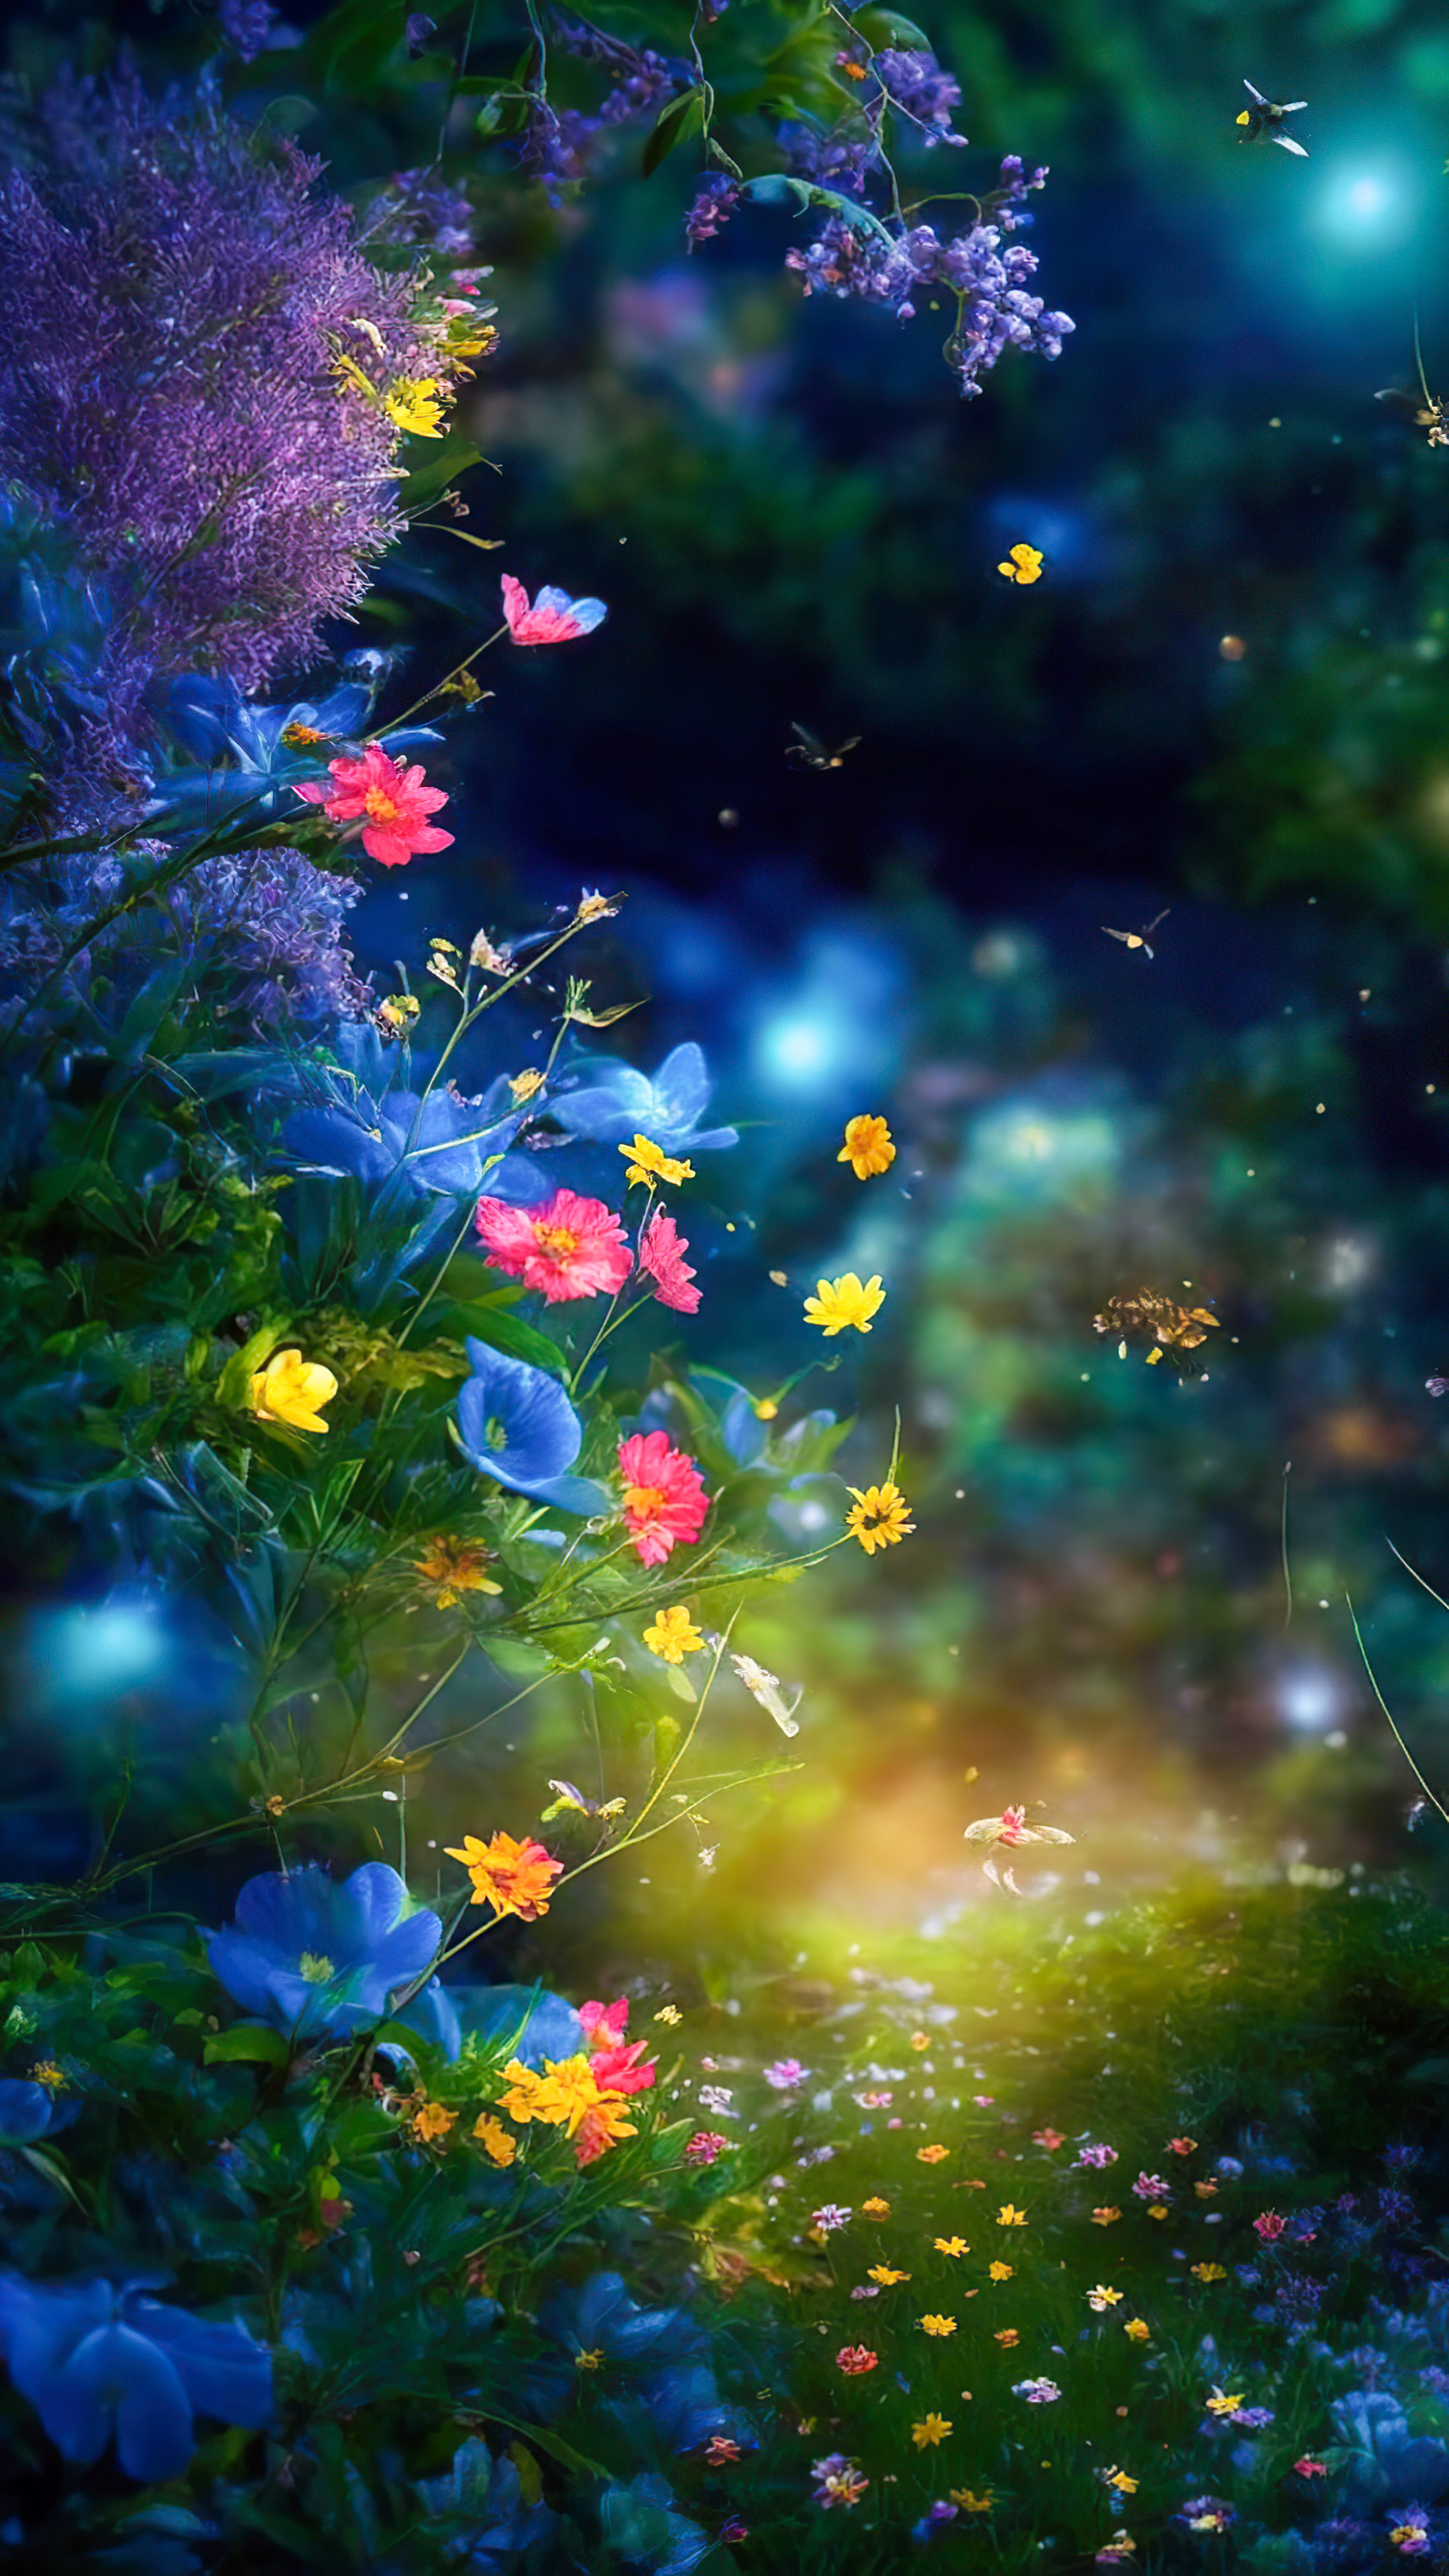 Experience the mystery with our beautiful dark nature wallpaper, illustrating a magical and whimsical garden at night, where fireflies dance around vibrant, luminescent flowers.